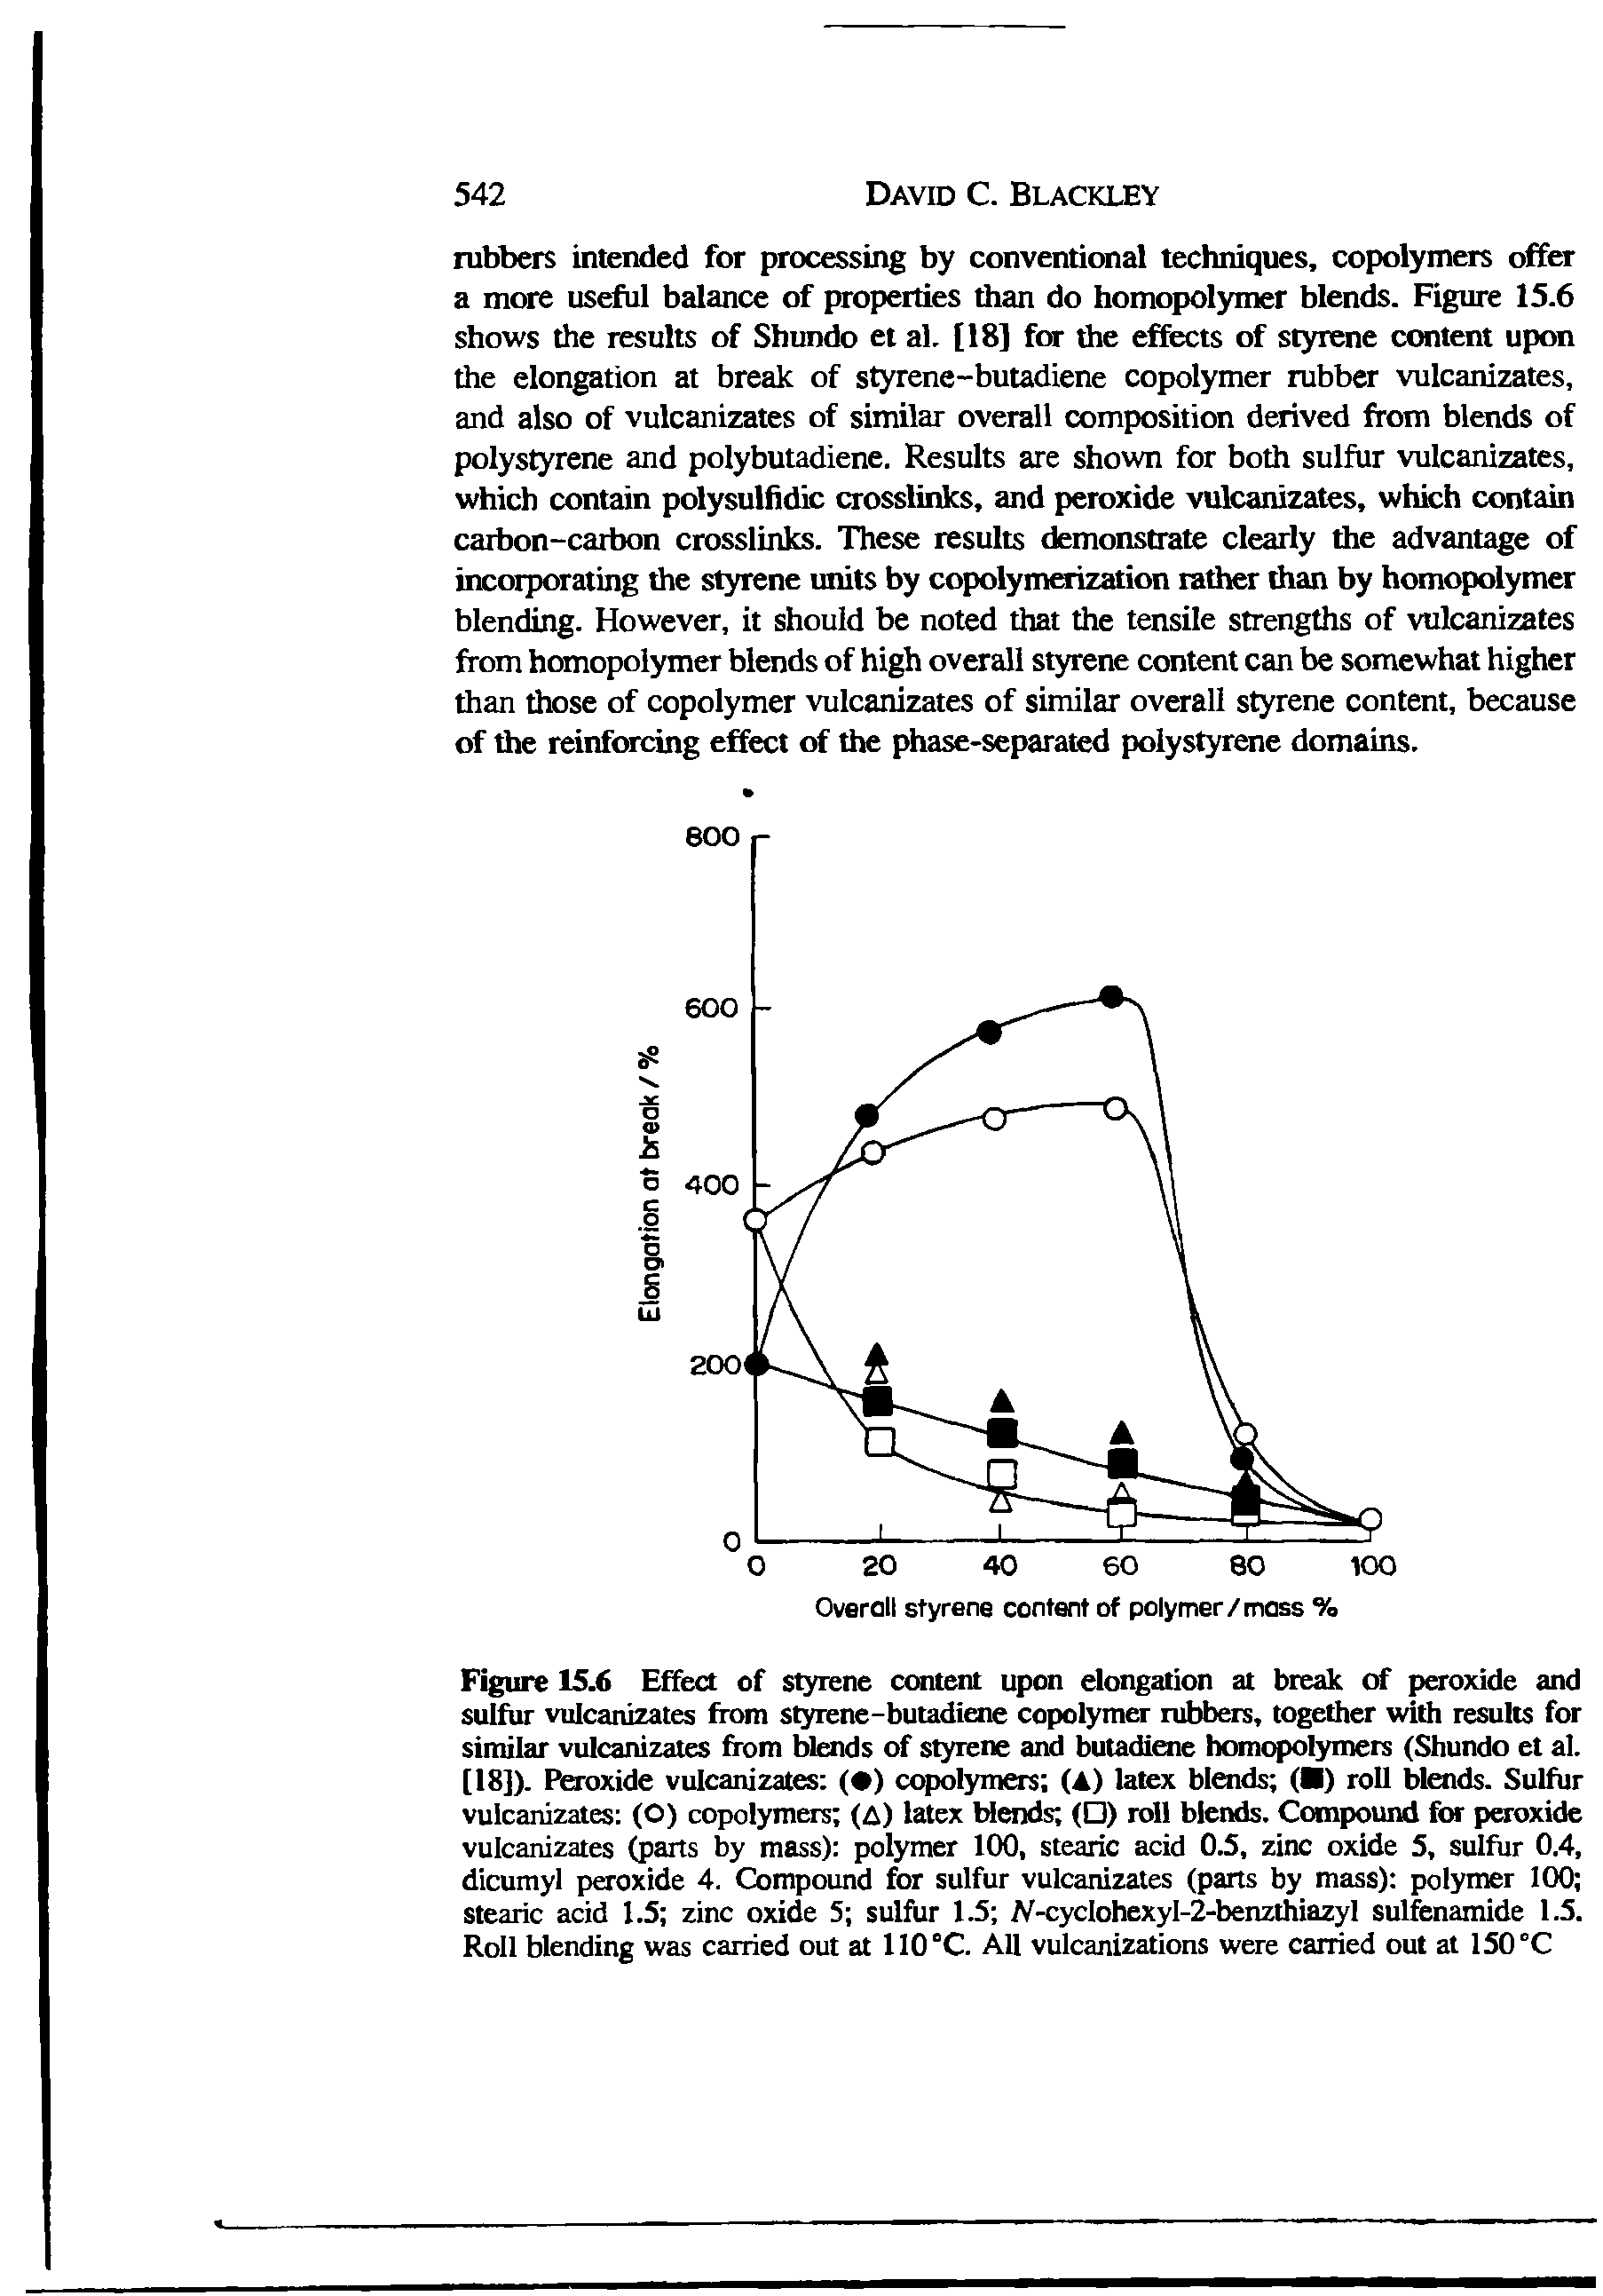 Figure 15,6 Effect of serene content iqxm dongadon at break erf peroxide and sulfur vulcanizates from serene-butadiene copolymer rubbers, together with results for similar vulcanizates from blends <rf styrene and butadiene homopolymers (Shundo et al. [18]). Peroxide vulcanizates ( ) cqxilyniers (A) latex blends ( ) roll Mends. Sulfur vulcanizates (O) copolymers (A) htex Mends ( ) toll blends. Compound finr peroxide vulcanizates (pairs by mass) polymer 100, stearic acid 0.S, zinc oxide S, sulfur 0.4, dicumyl peroxide 4. Compound for sulfur vulcanizates (parts by mass) polymer 100 stearic acid 1.S zinc oxide S sulfur 1.5 N-cyclohexyl-2-benzthiazyl sulfenamide 1.5. Roll blending was carried out at 1I0°C. All vulcanizations were carried out at 150 °C...